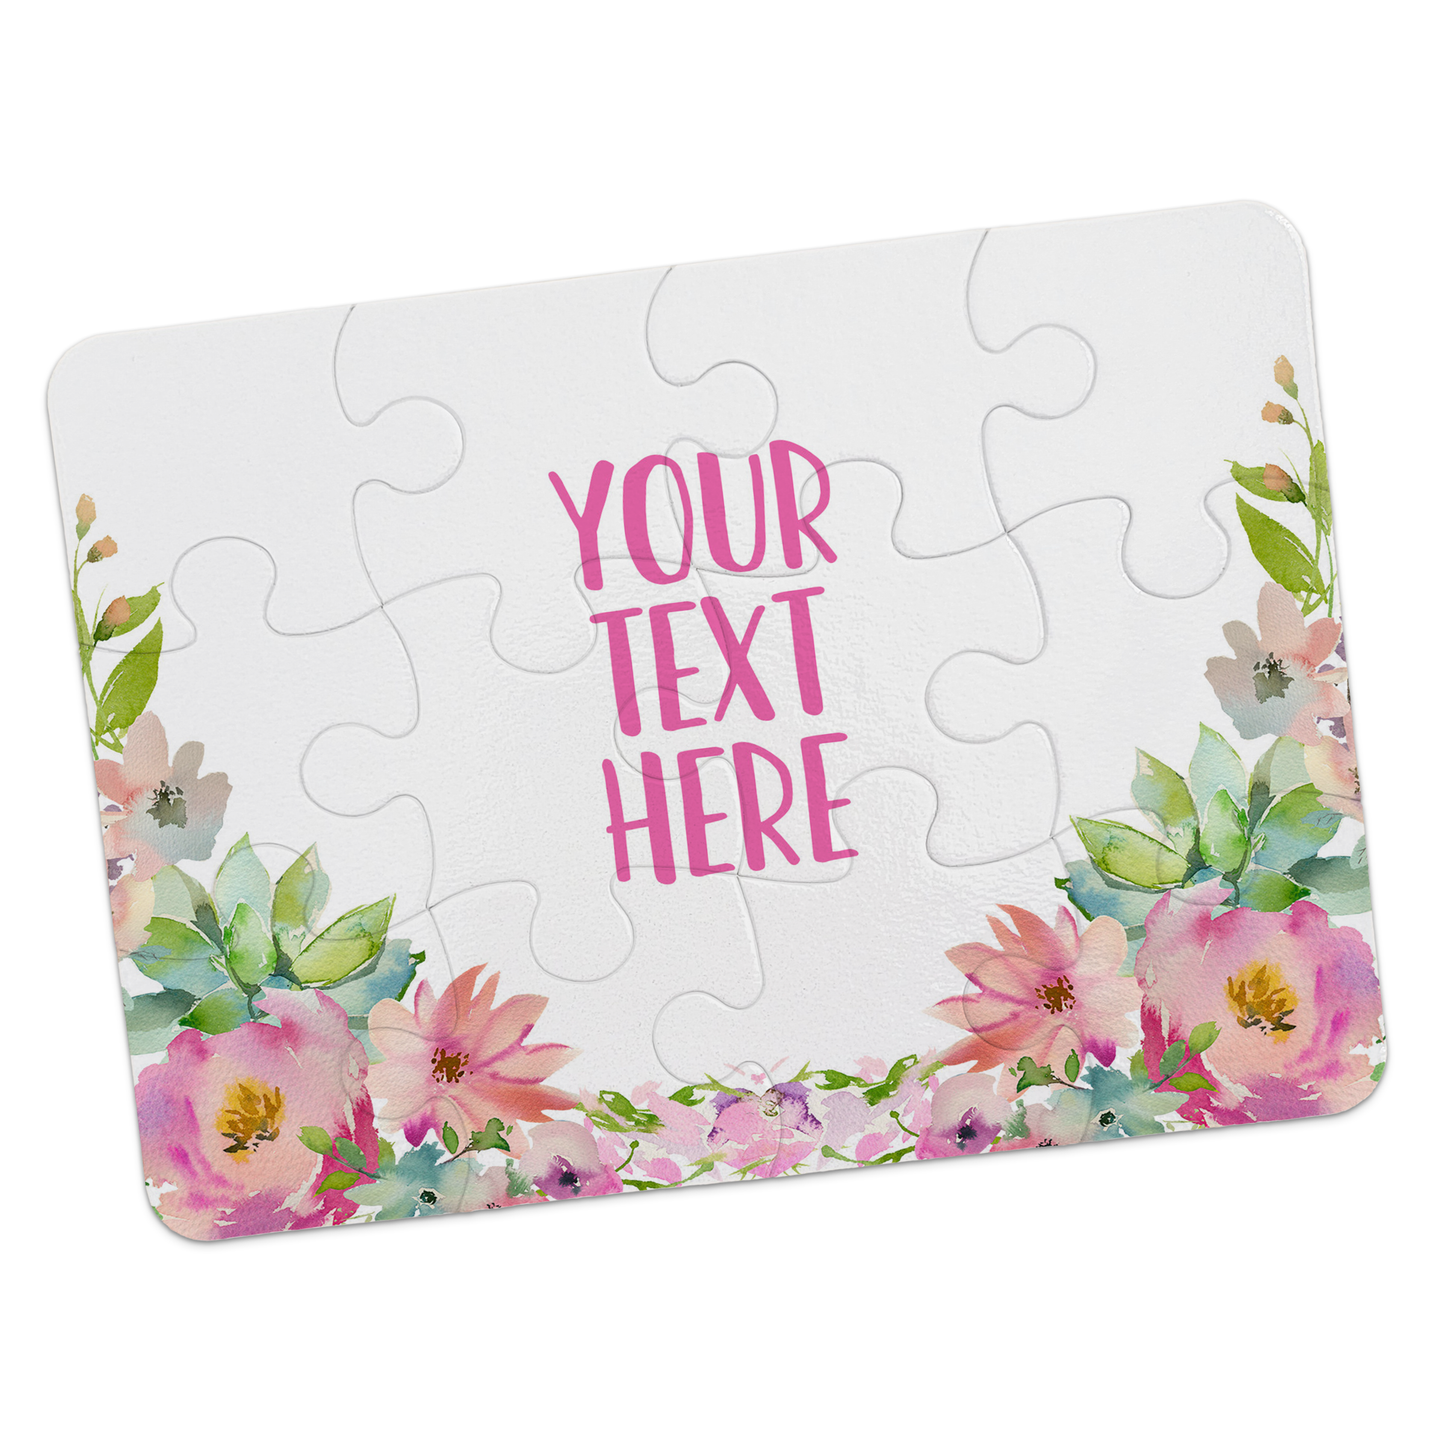 Create Your Own Puzzle - Floral Design - CYOP0122